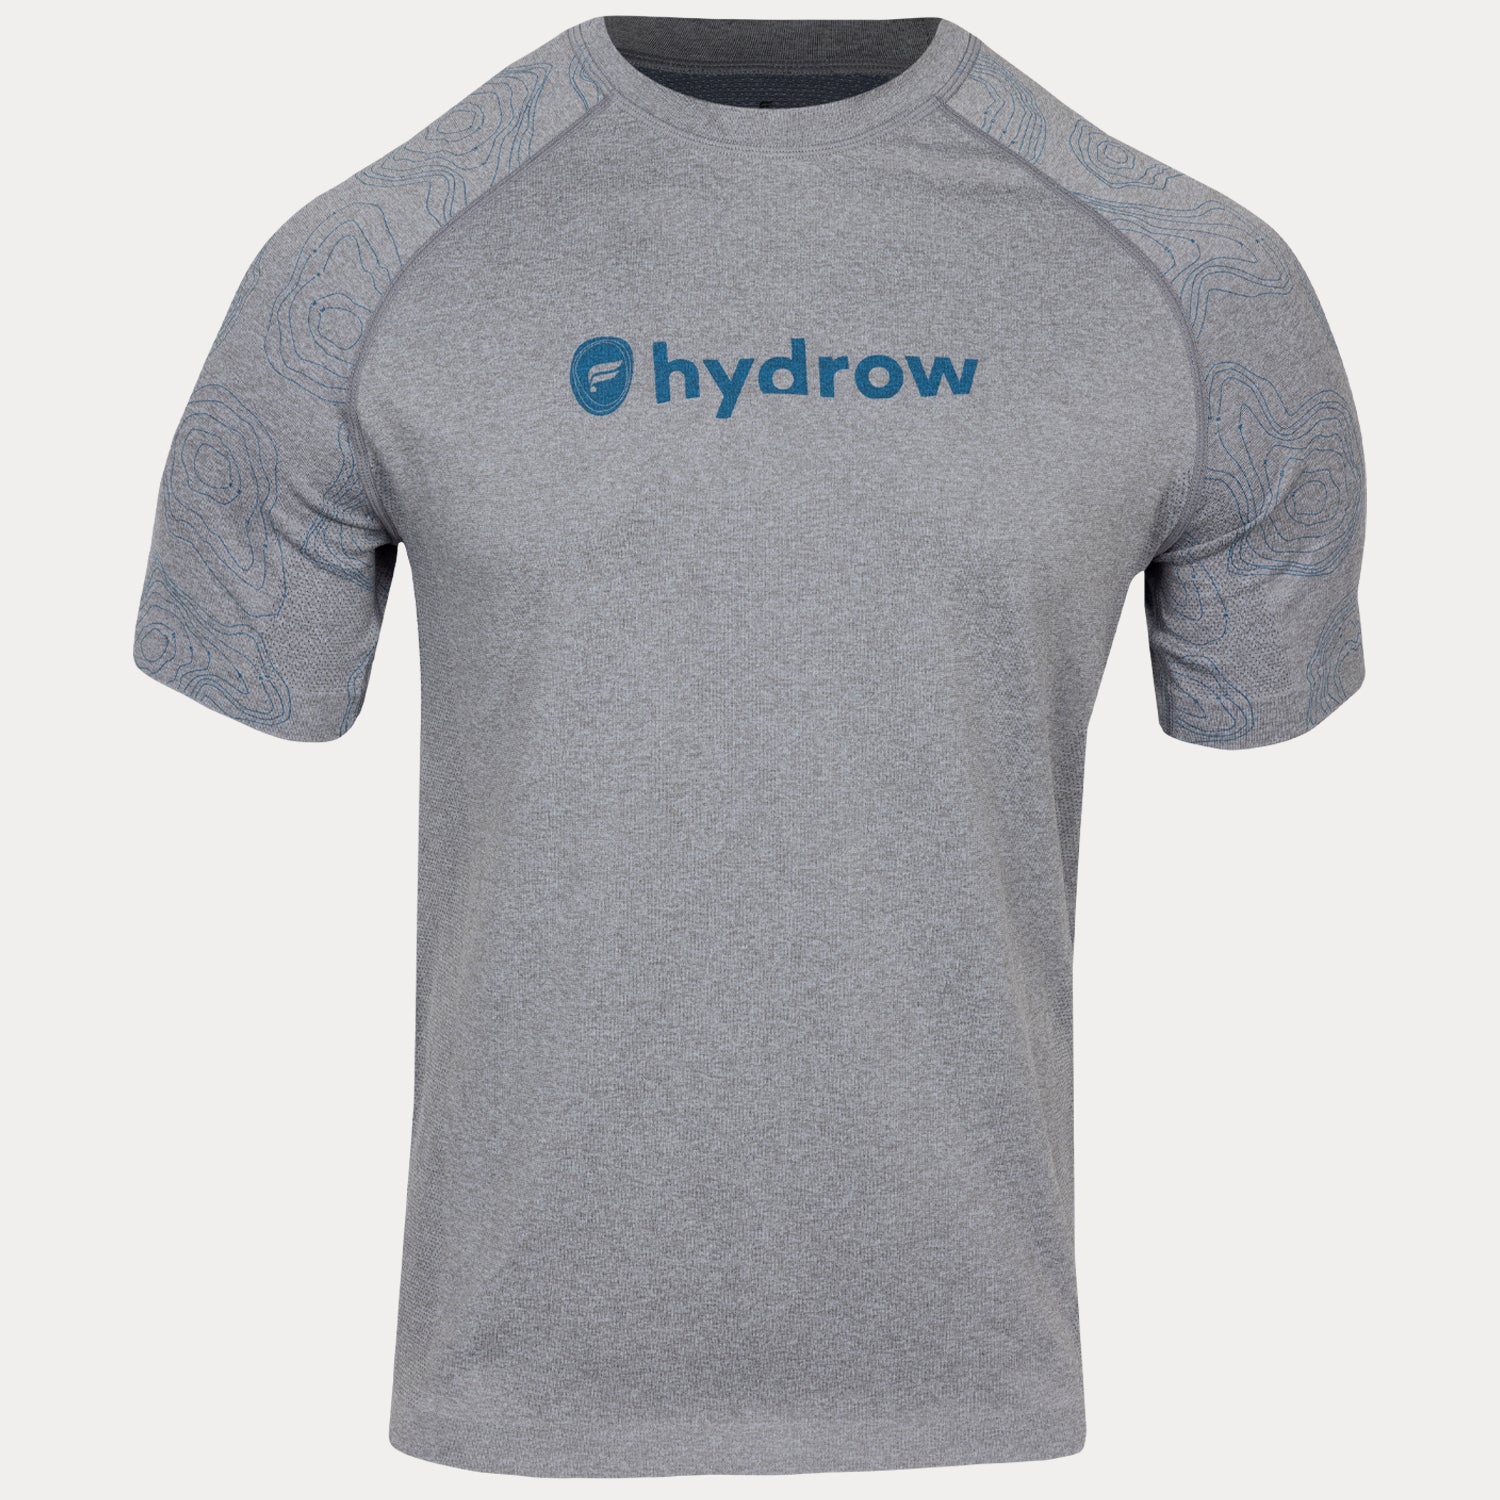 Grey short sleeve t-shirt with dark blue fabletics and hydrow logo on front